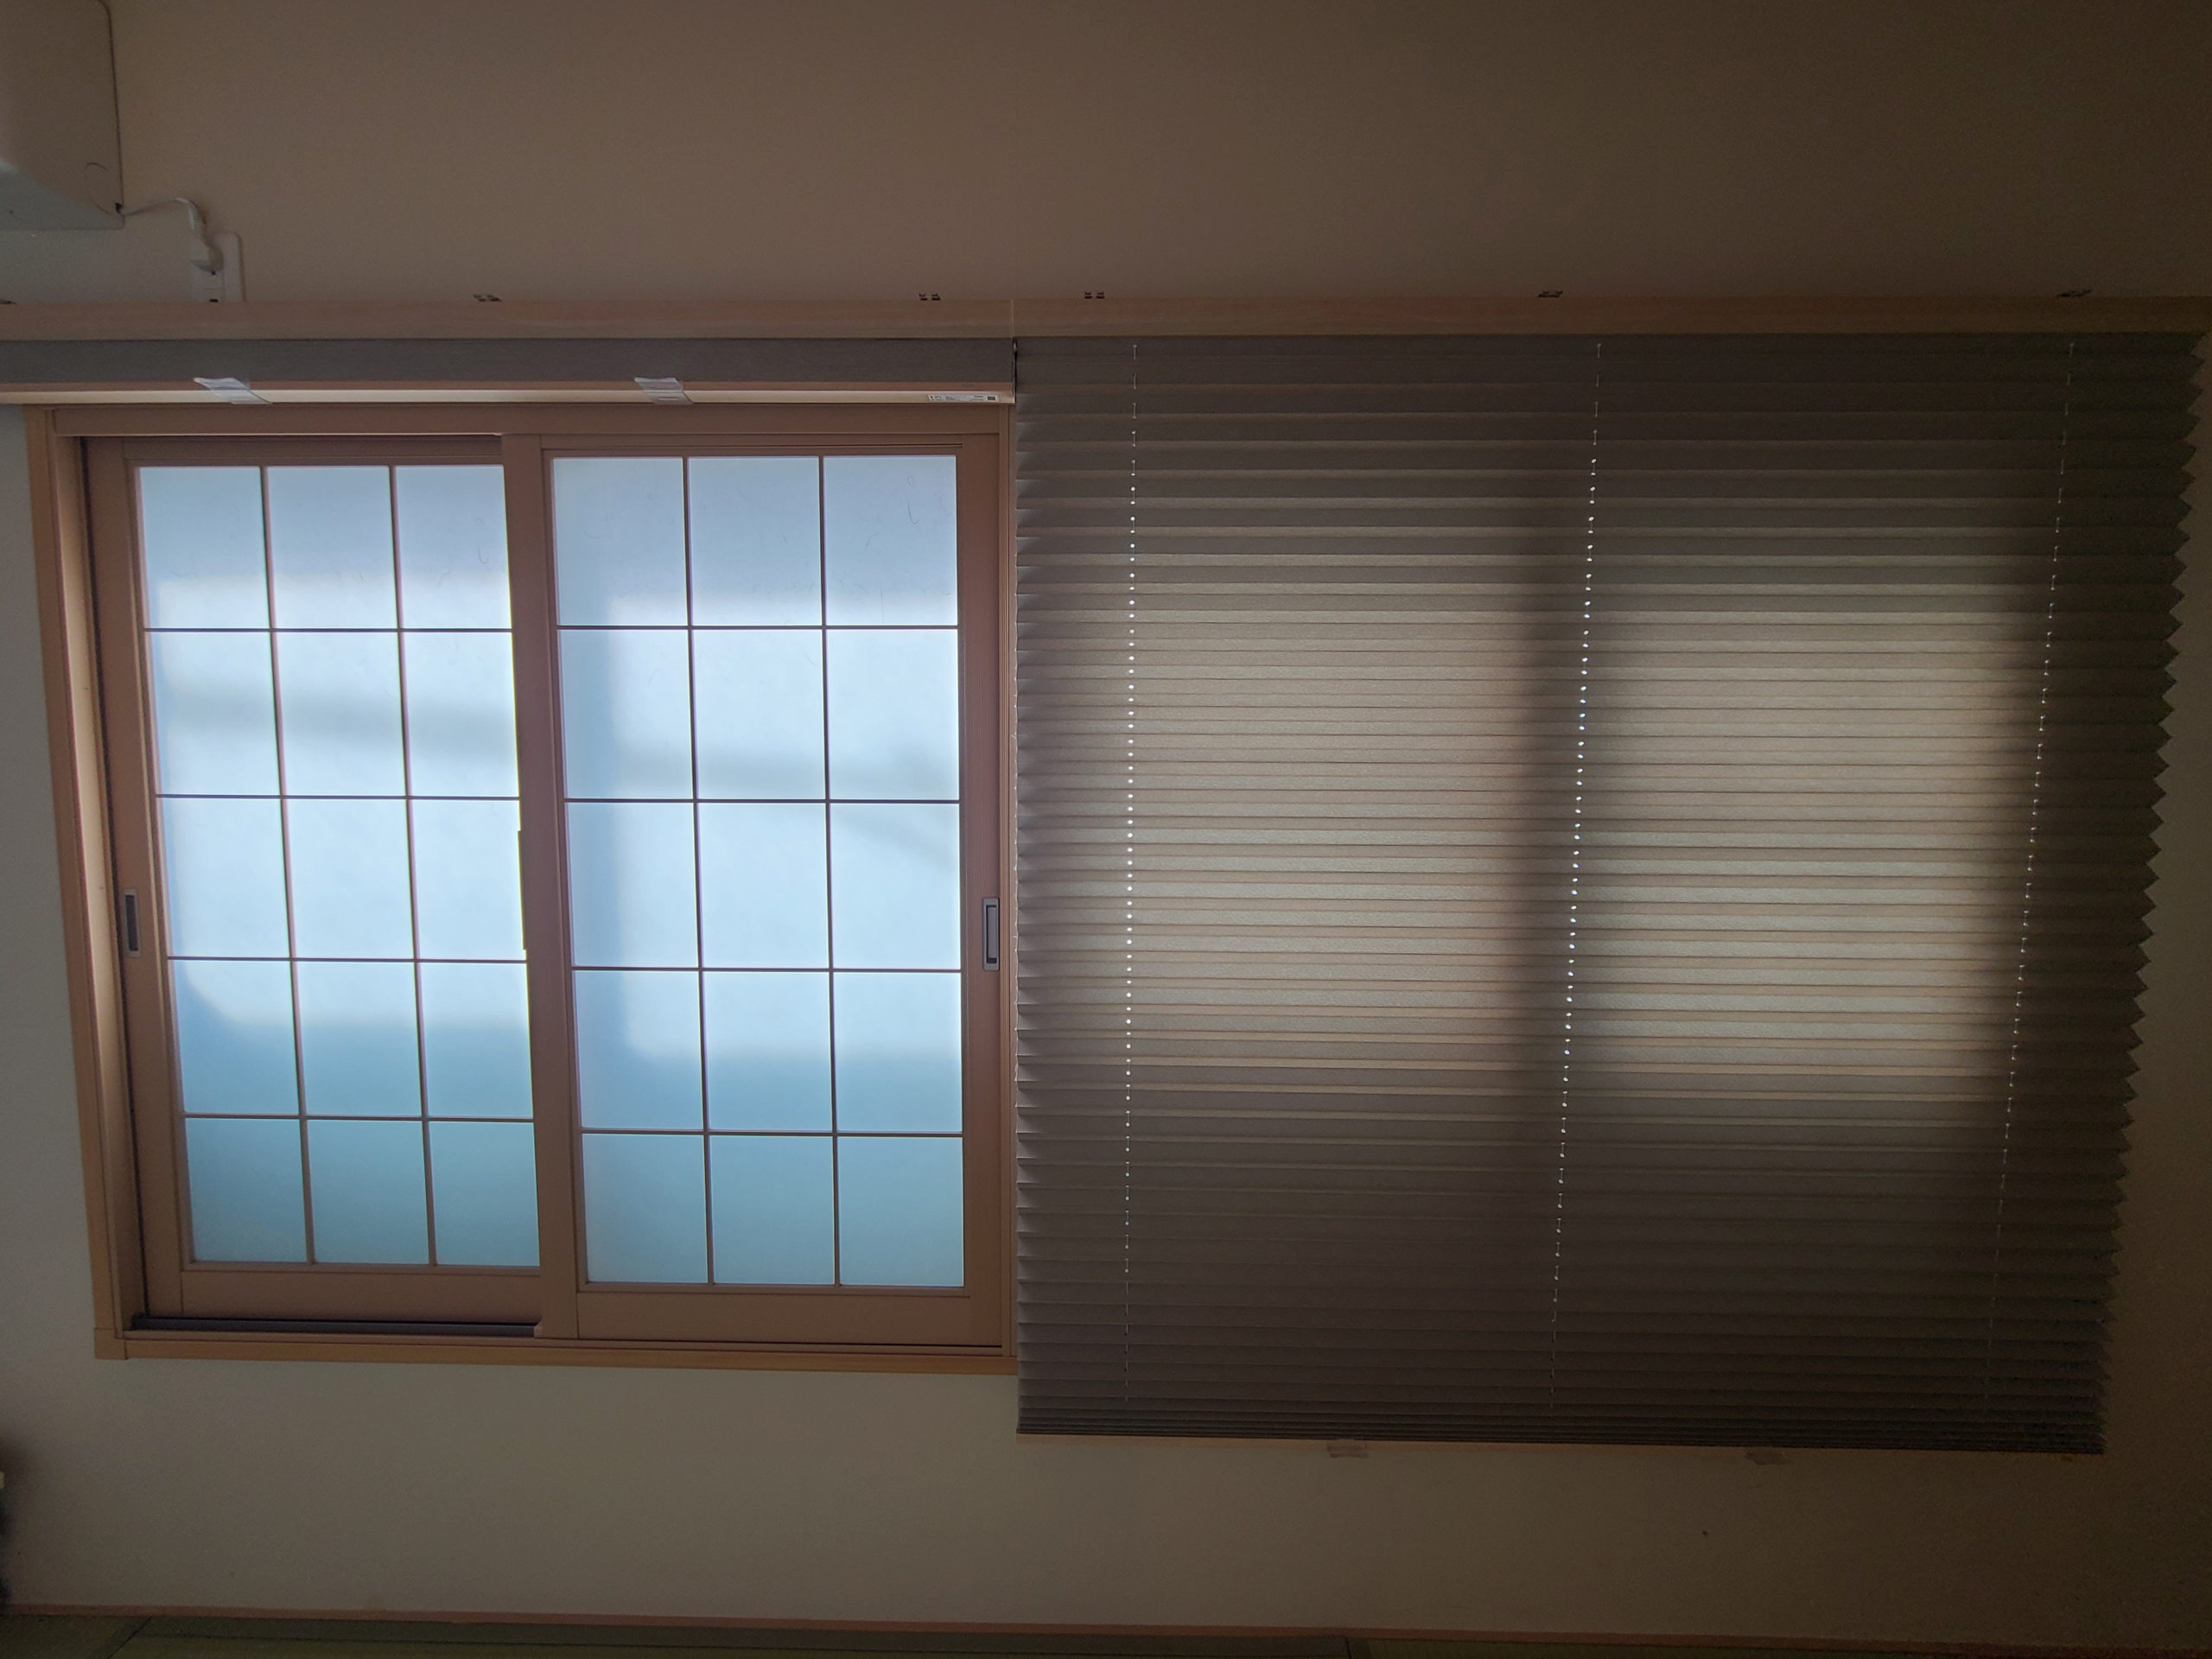 Shutters to keep the sunlight out in the morning